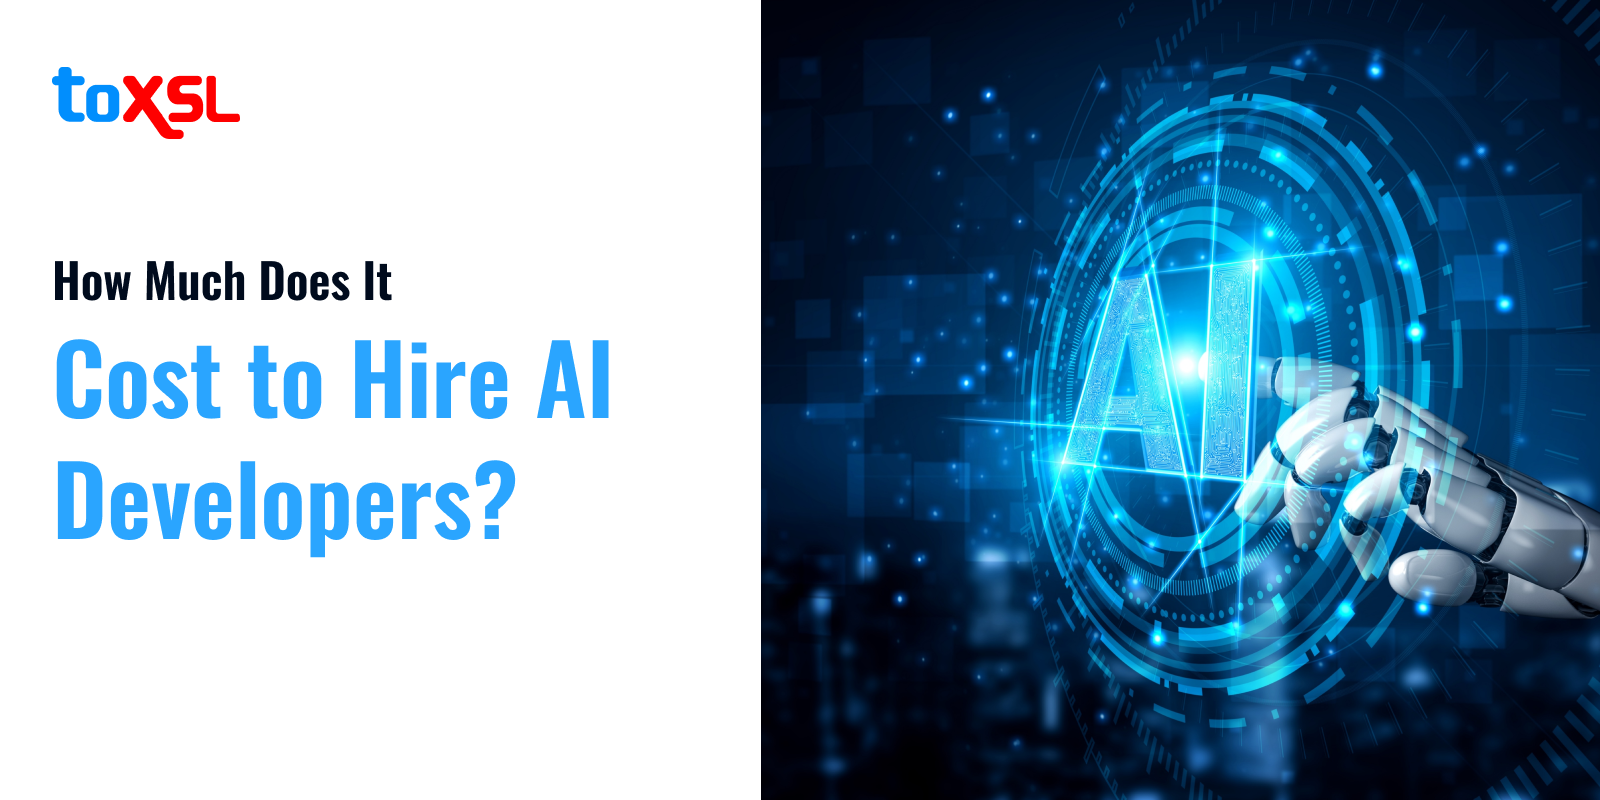 How Much Does It Cost to Hire AI Developers?